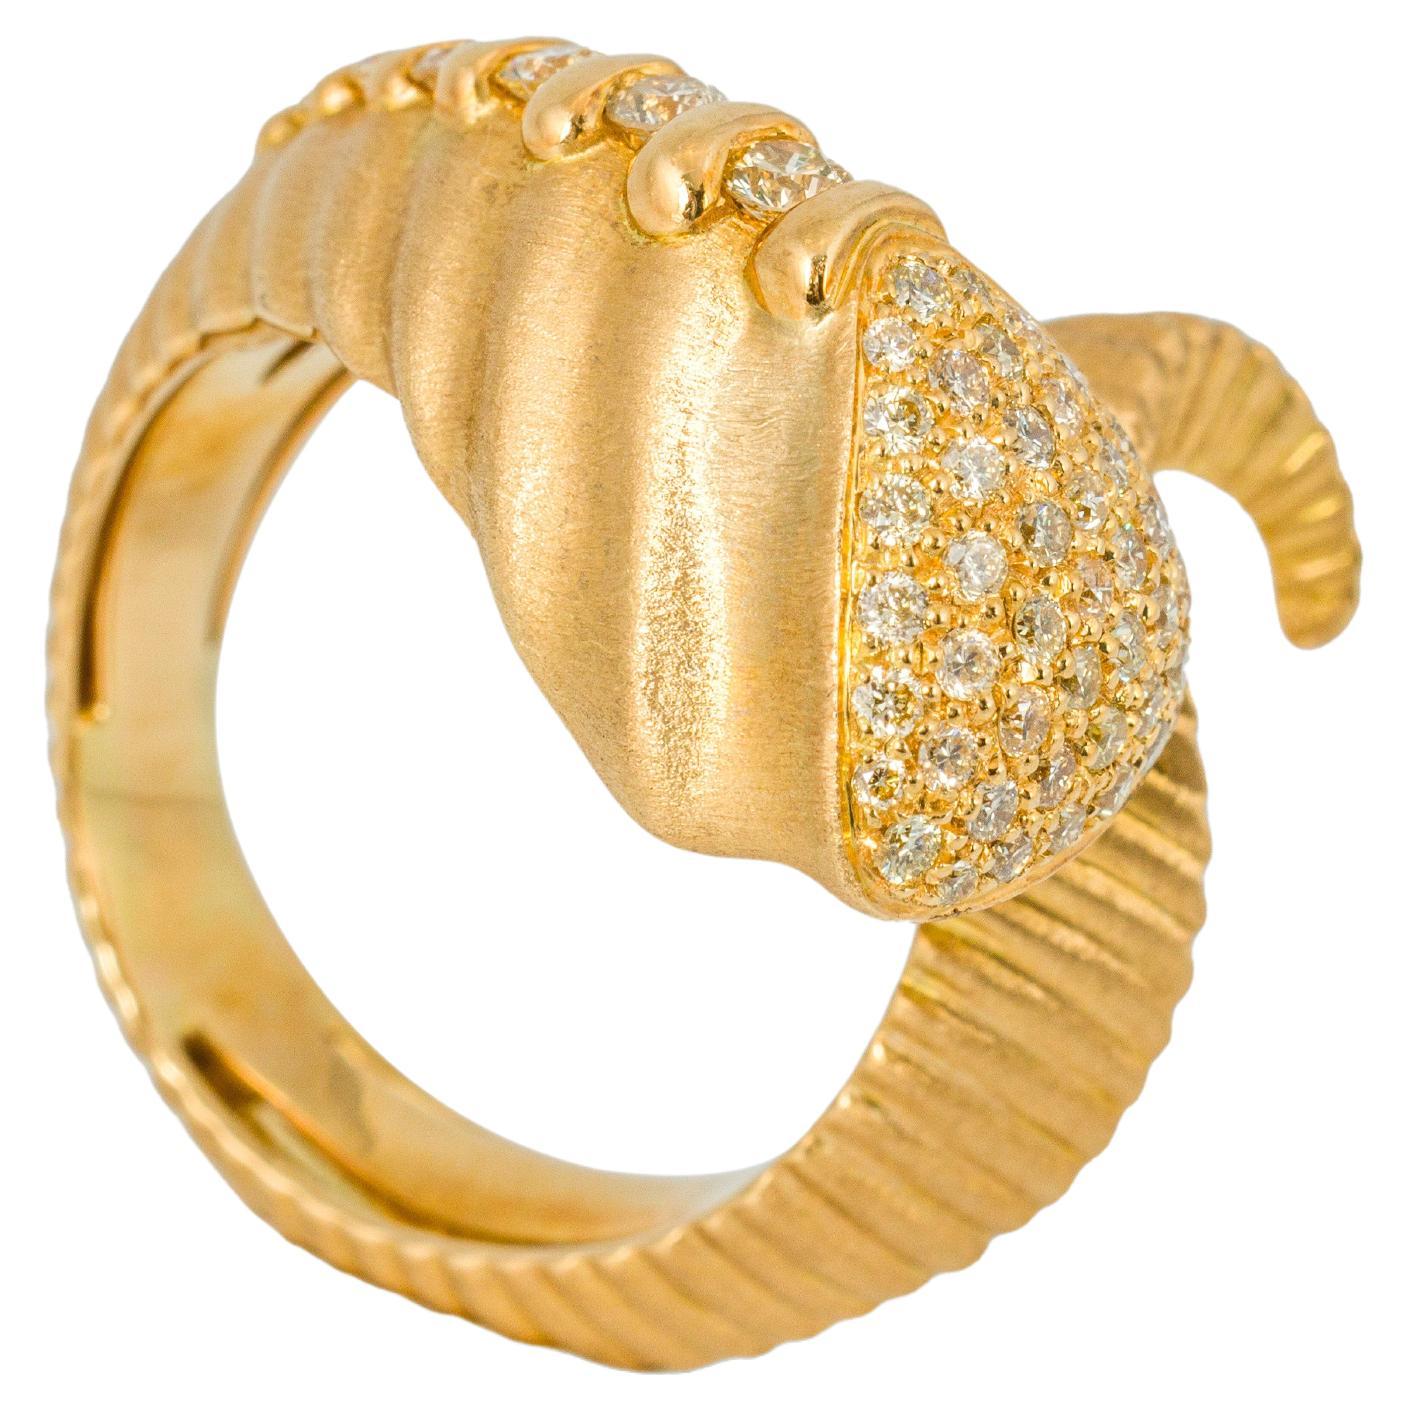 "Costis" Ram's Horn Collection - Ring Pave' with Diamonds For Sale